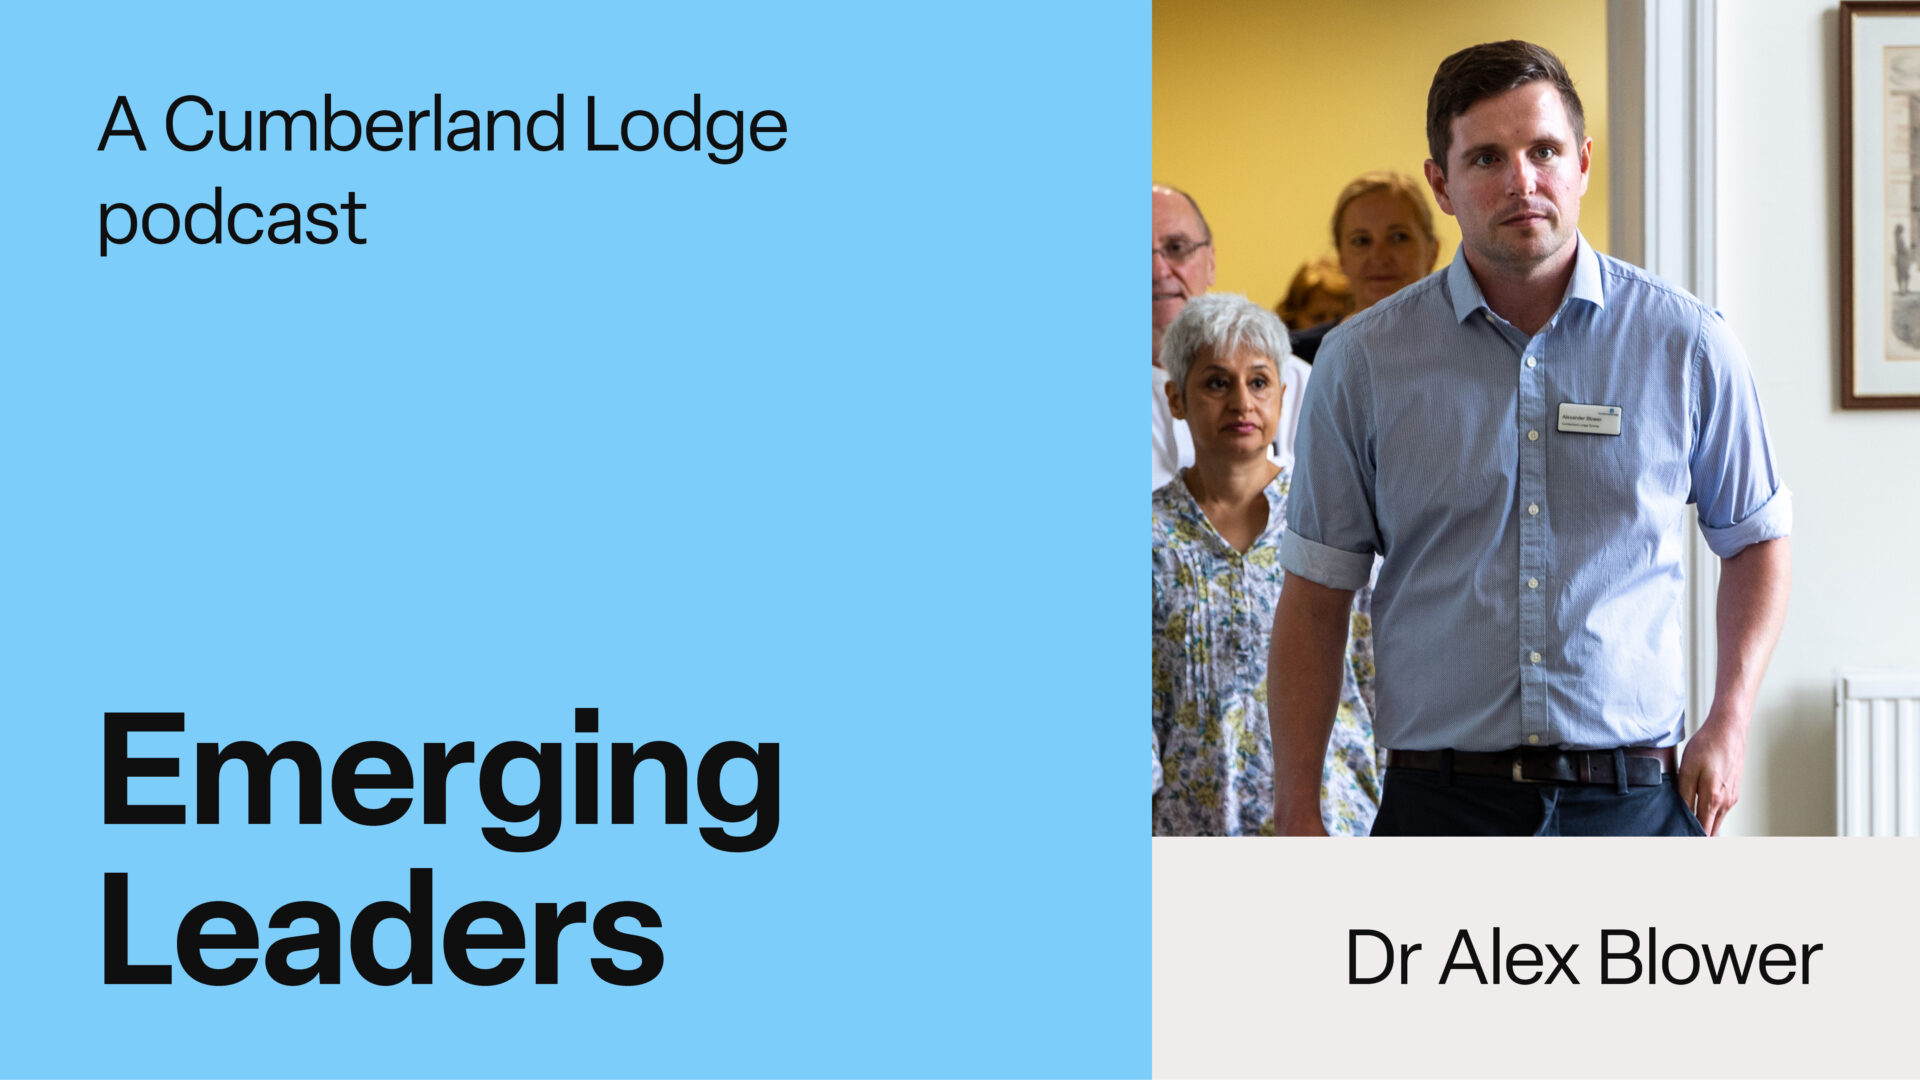 TEXT: A Cumberland Lodge Podcast. Emerging Leaders: Dr Alex Blower - Working Class Boys